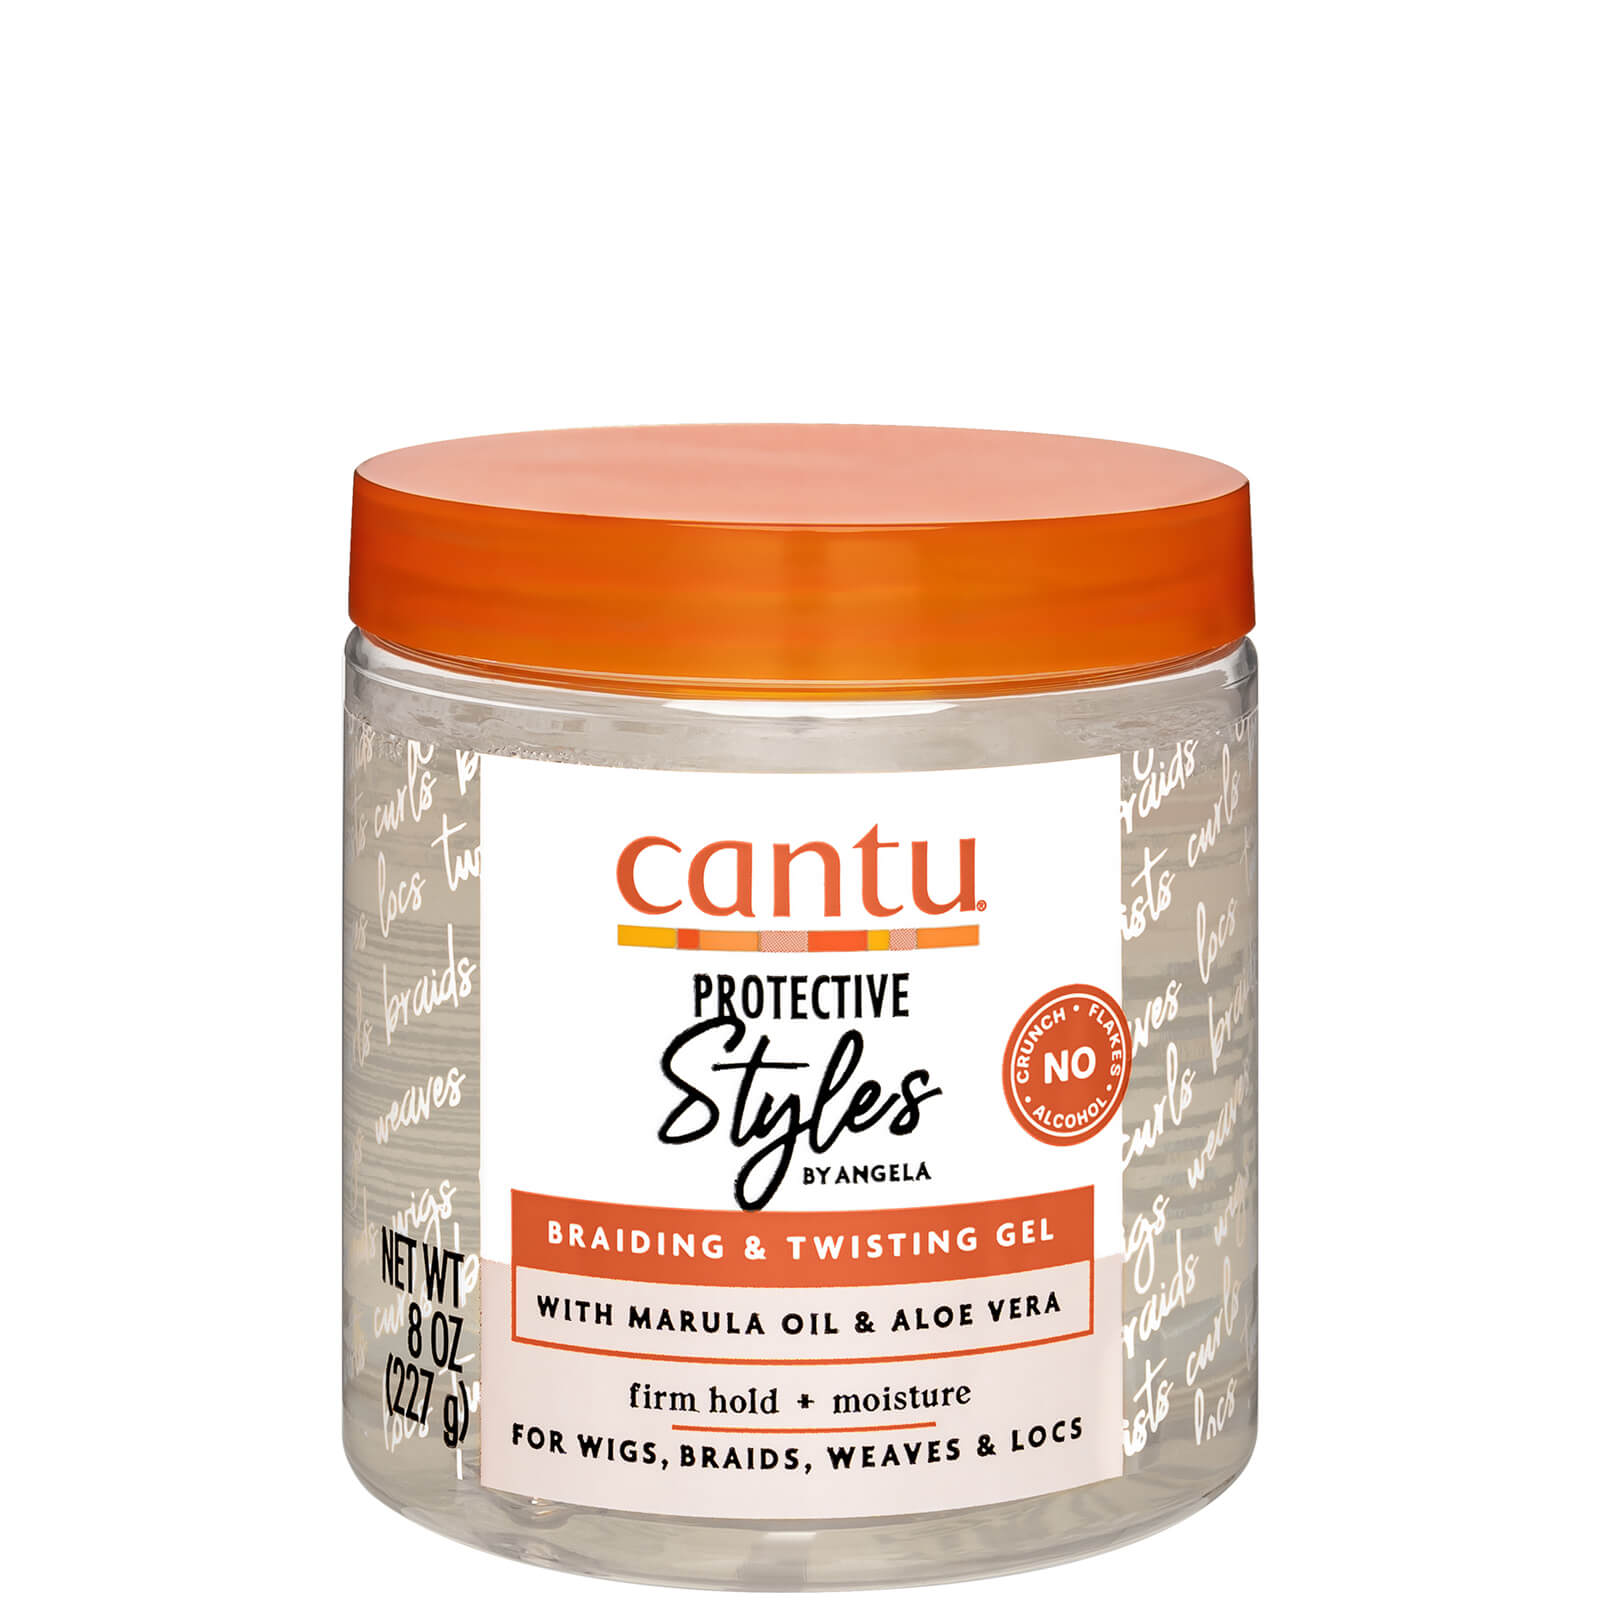 Image of Cantu Protective Styles Braiding and Twisting Gel 227g